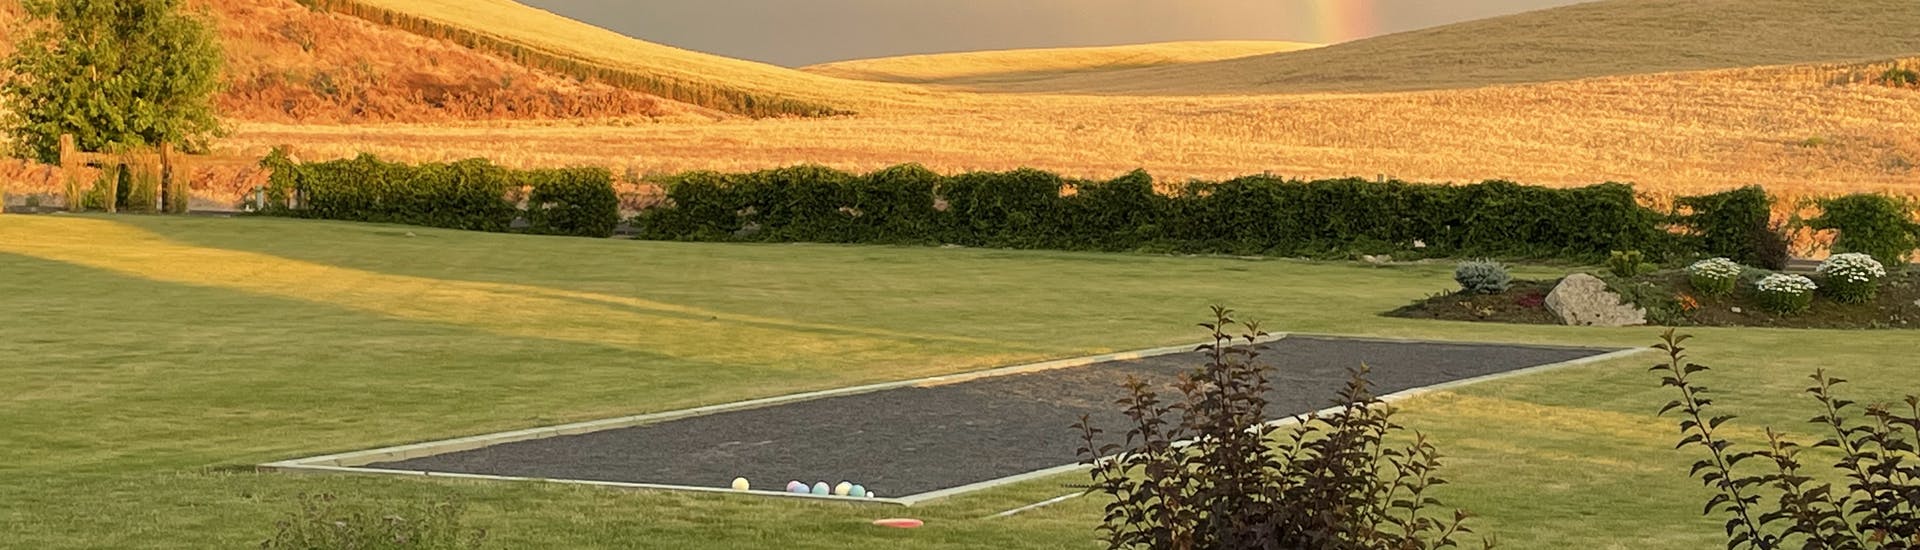 Bocce Ball Court in Green Pasture, with yellow wheat fields in the distance and a rainbow in the sky